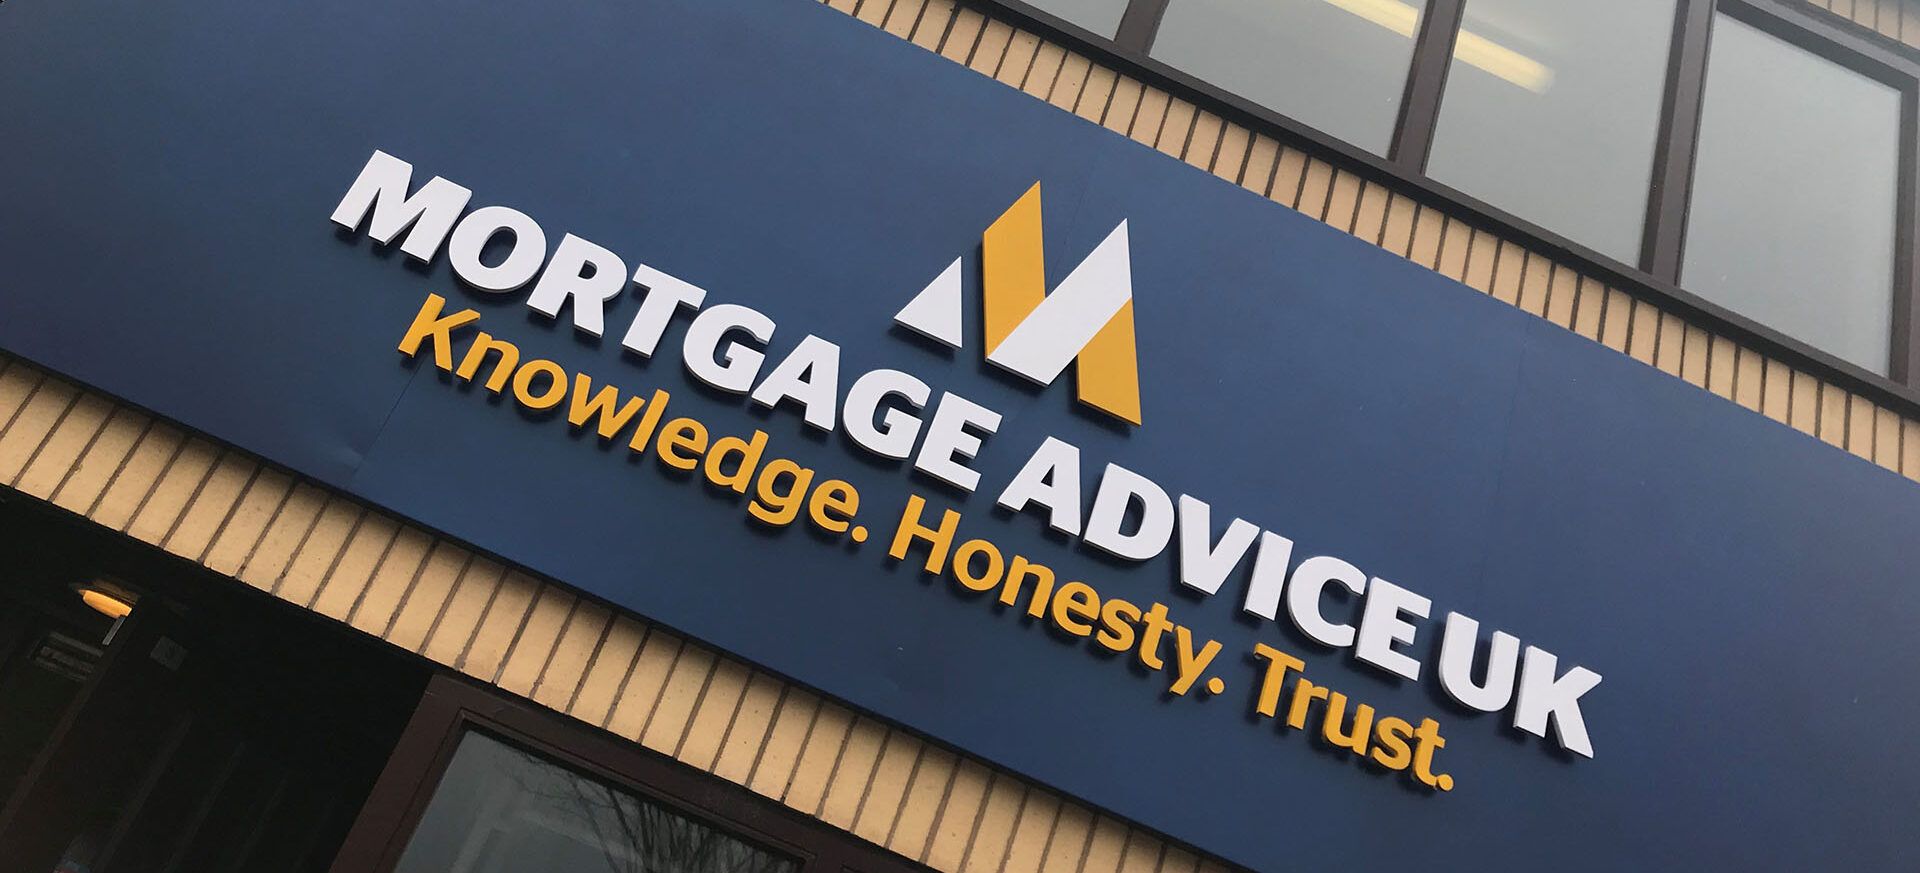 Mortgage Advice and Services